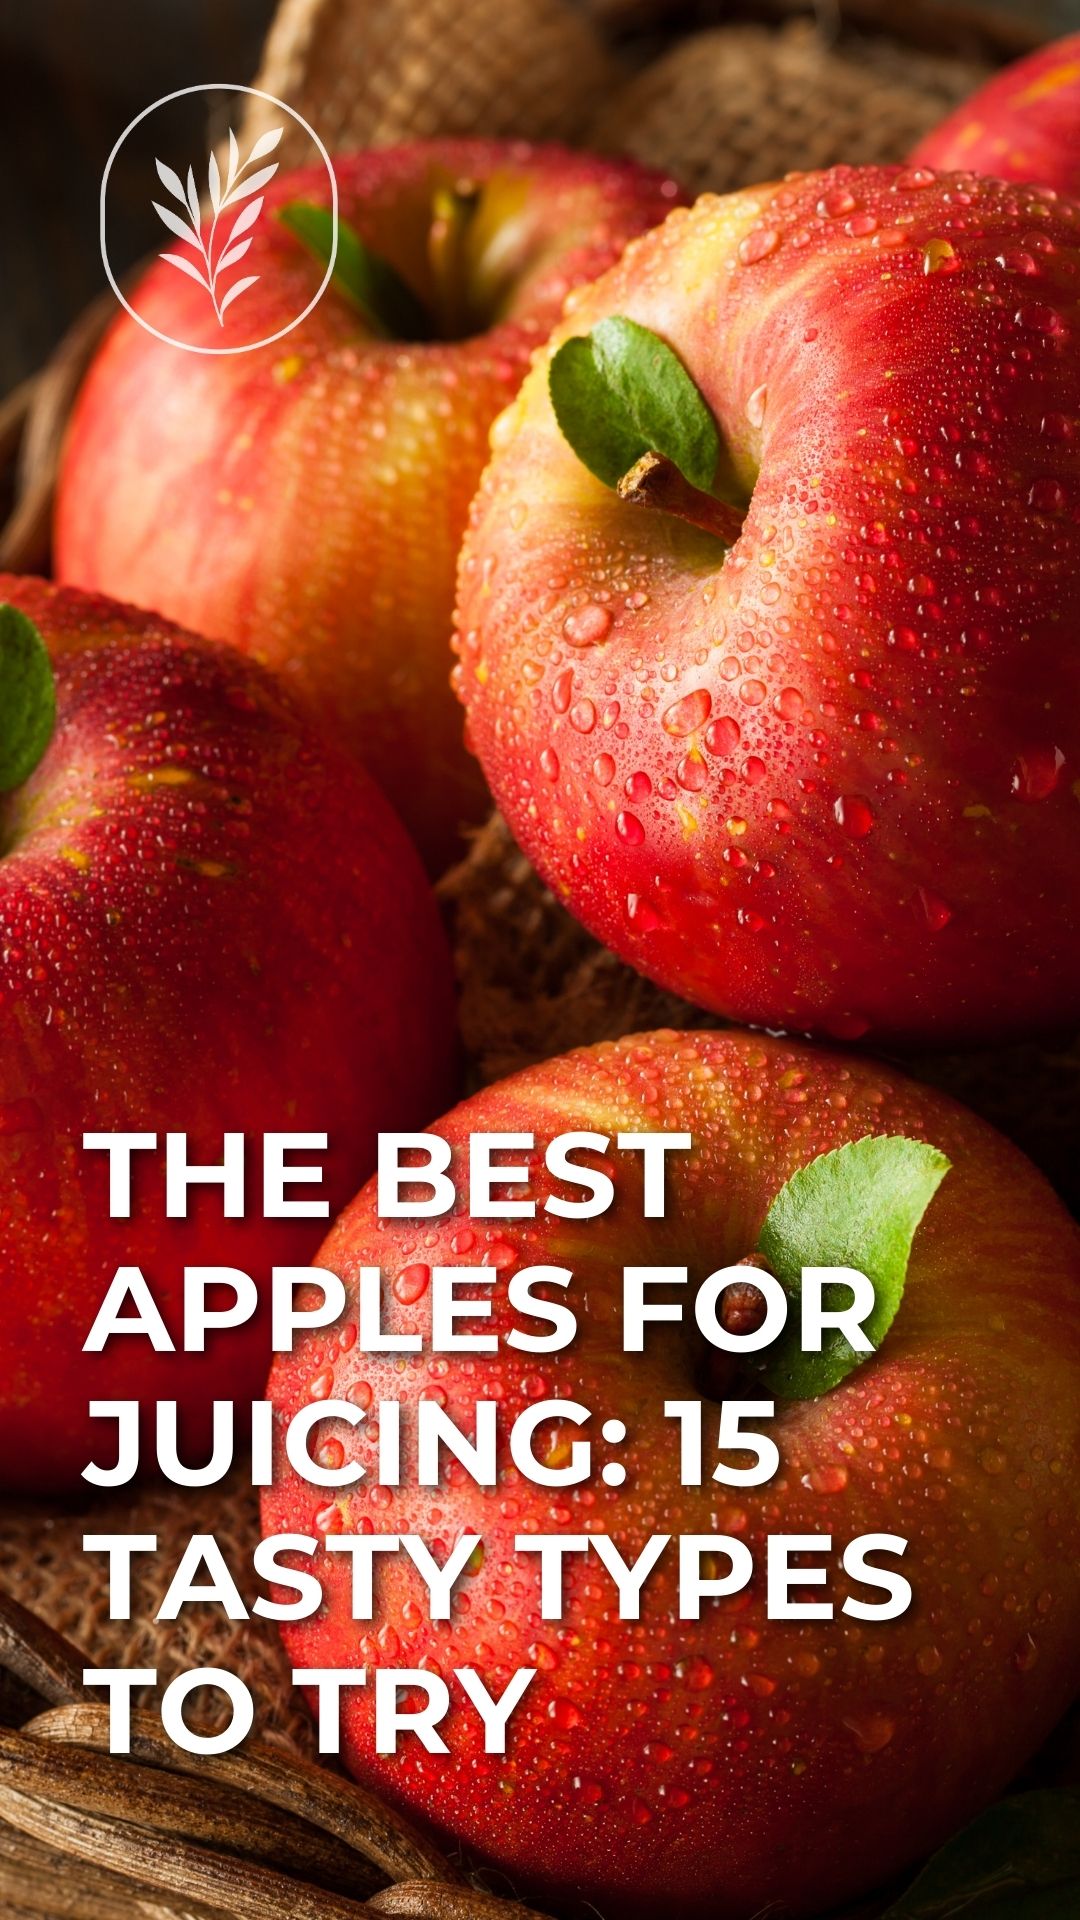 The best apples for juicing: 15 tasty types to try via @home4theharvest